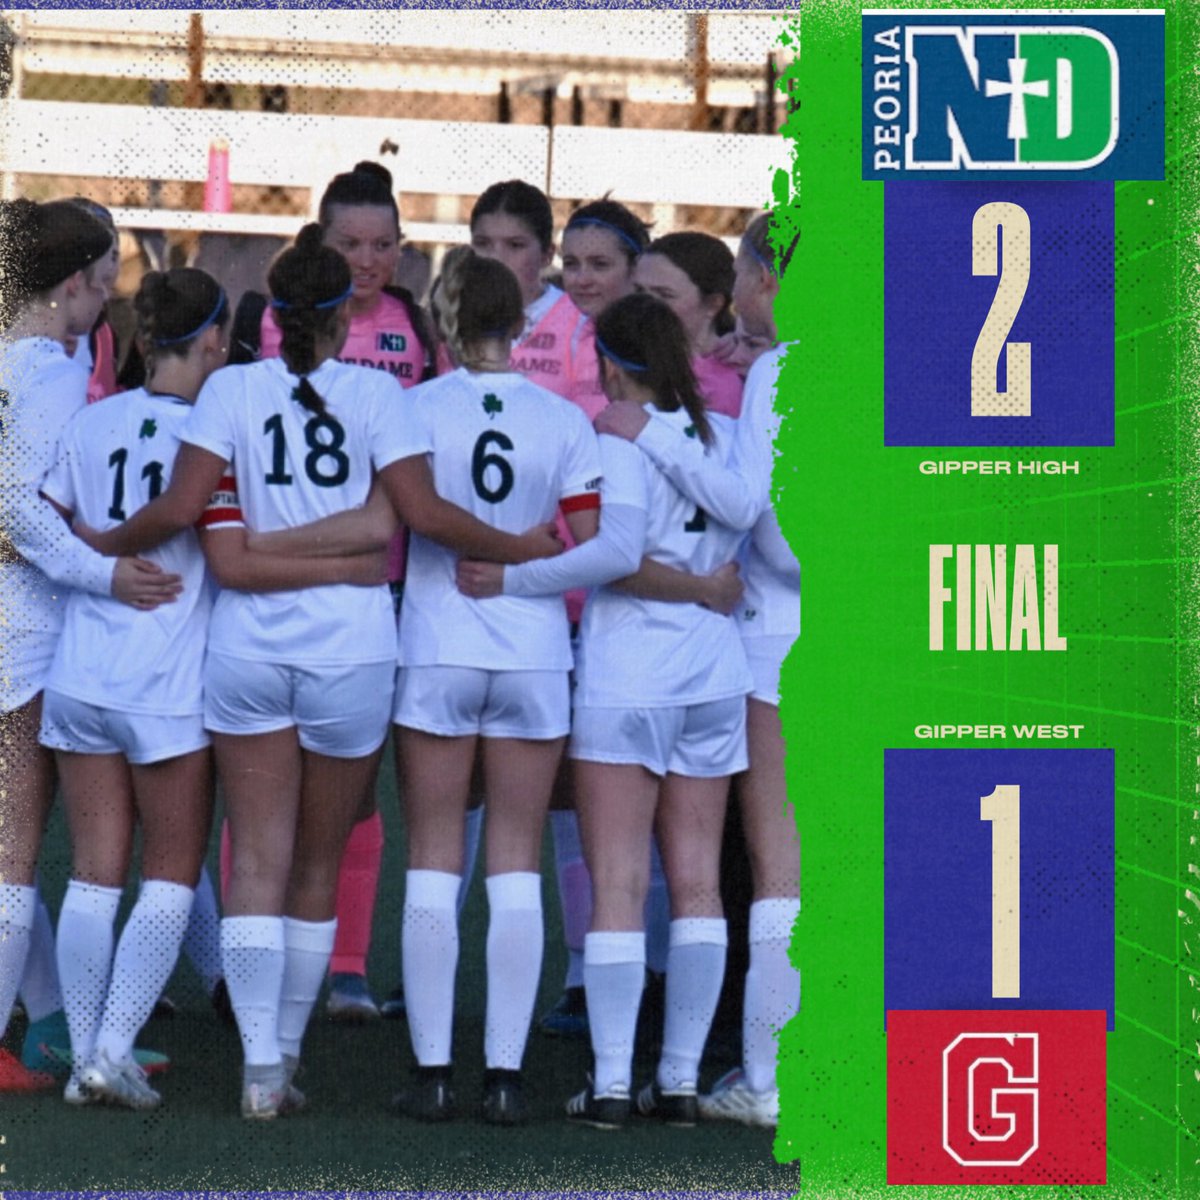 IRISH WIN!!! Gurls showed some grit and toughness going down 1-0 at half and coming back for a 2-1 win against the defending State Champions! Back at it with another tough game Monday night! ☘️⚽️ #PNDsoccer